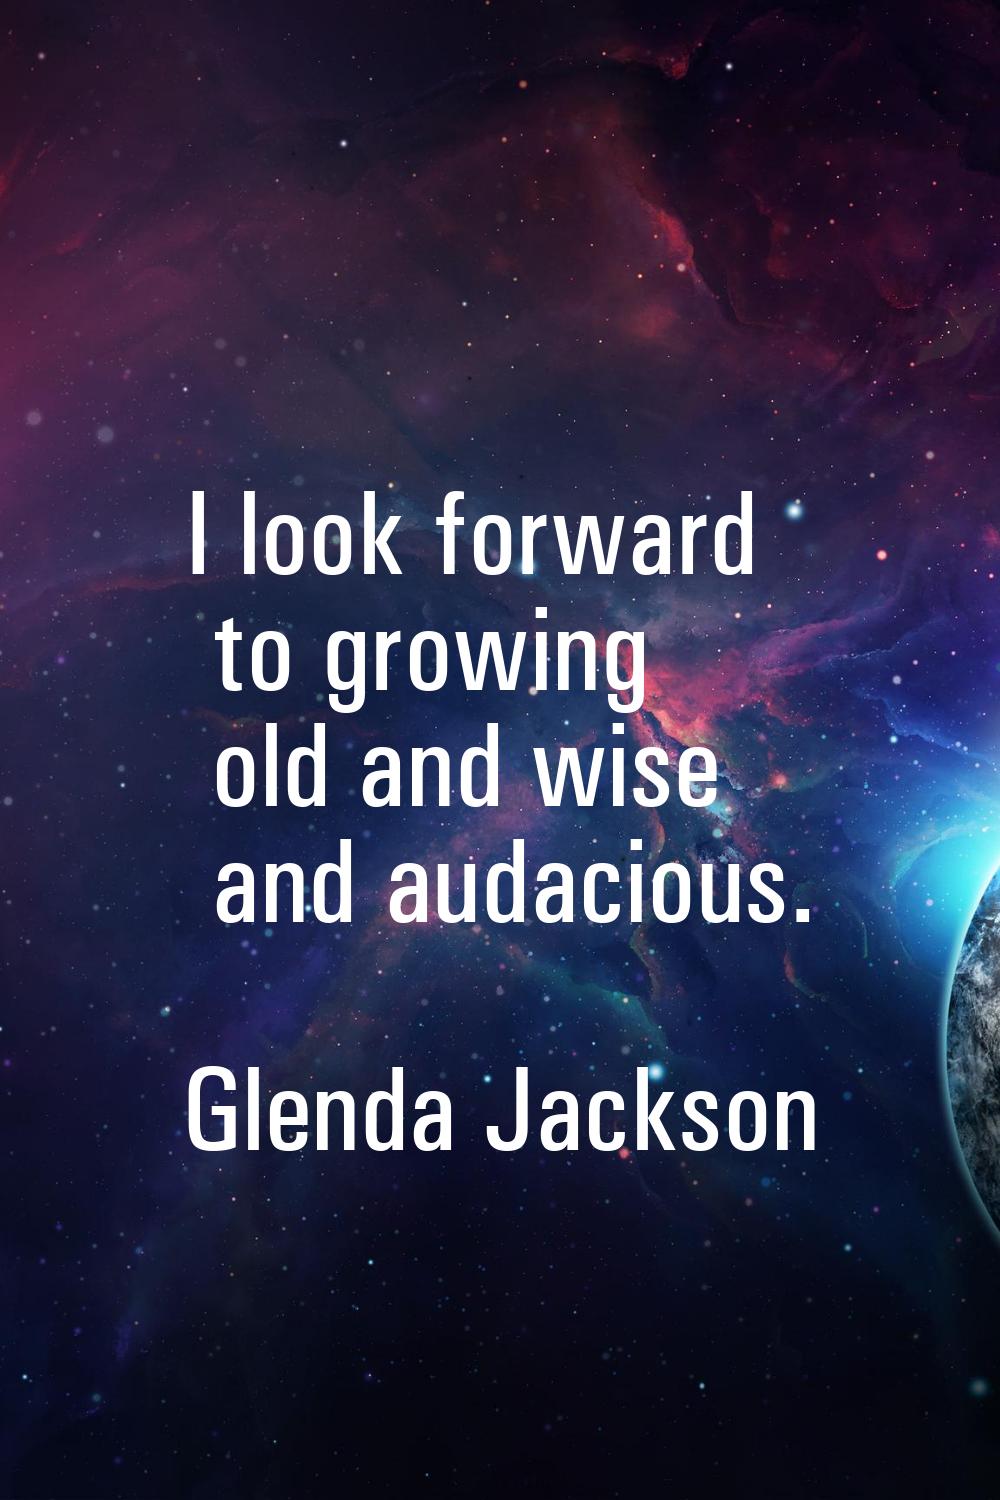 I look forward to growing old and wise and audacious.